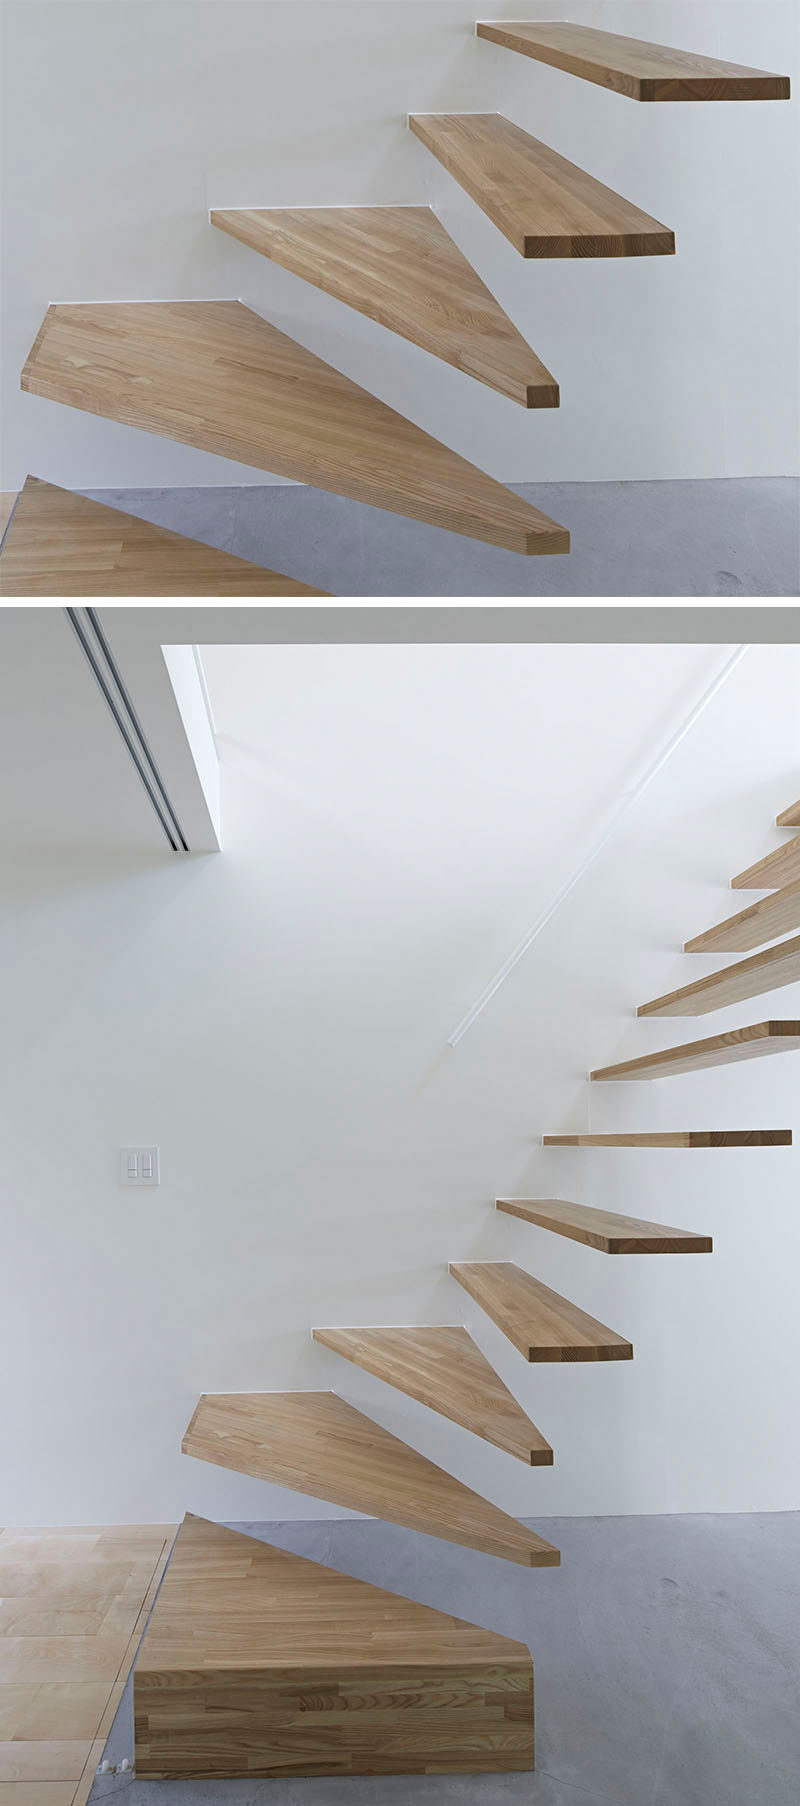 18 Examples Of Stair Details To Inspire You // These light wood floating stairs break up the white walls and concrete floor.